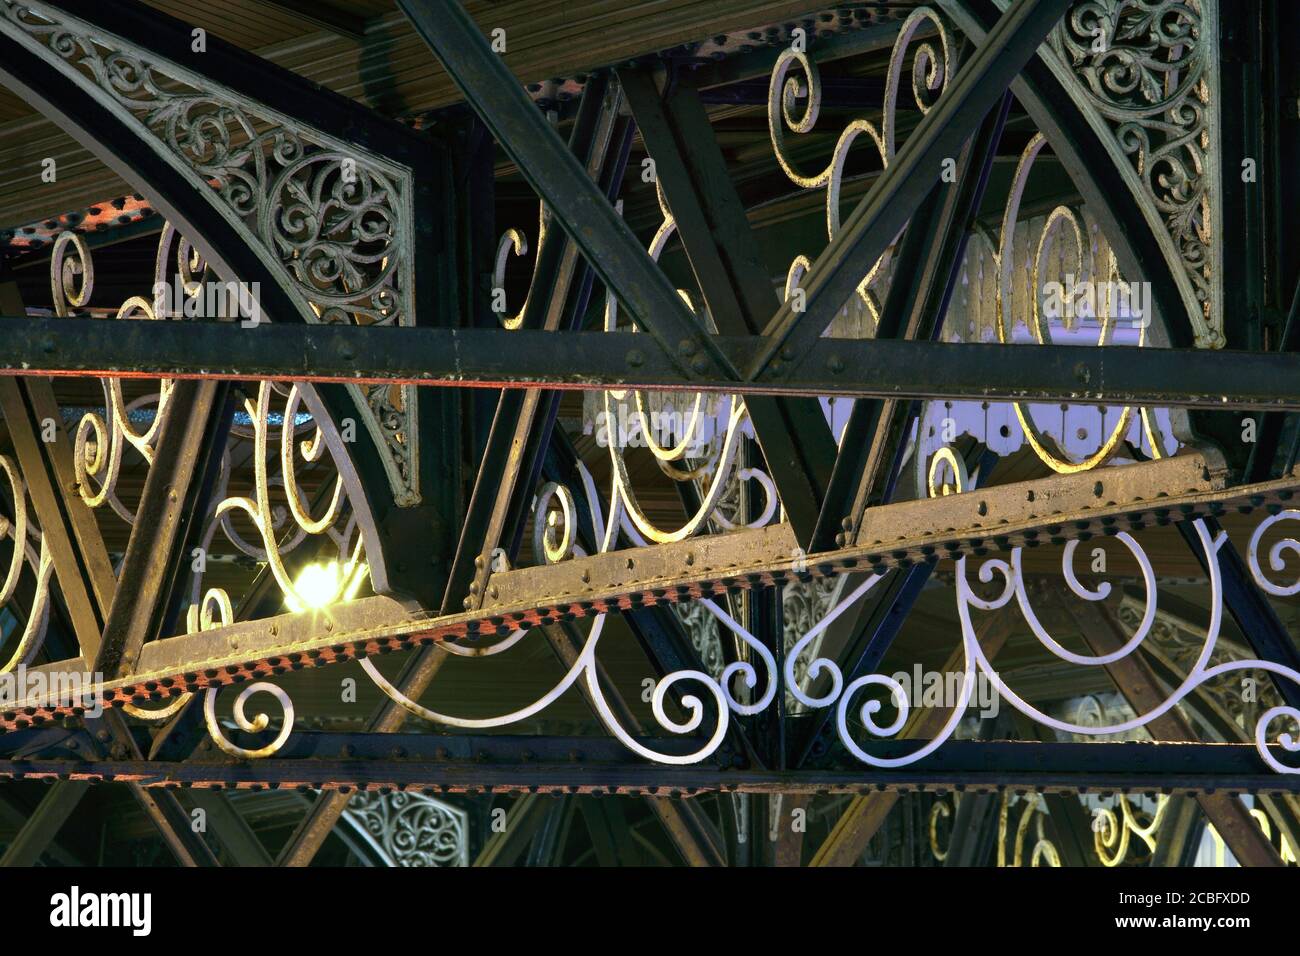 Close up of the flamboyant ironwork in the canopy over the entrance to Brighton station. (Photographed at night with station lighting.) Stock Photo